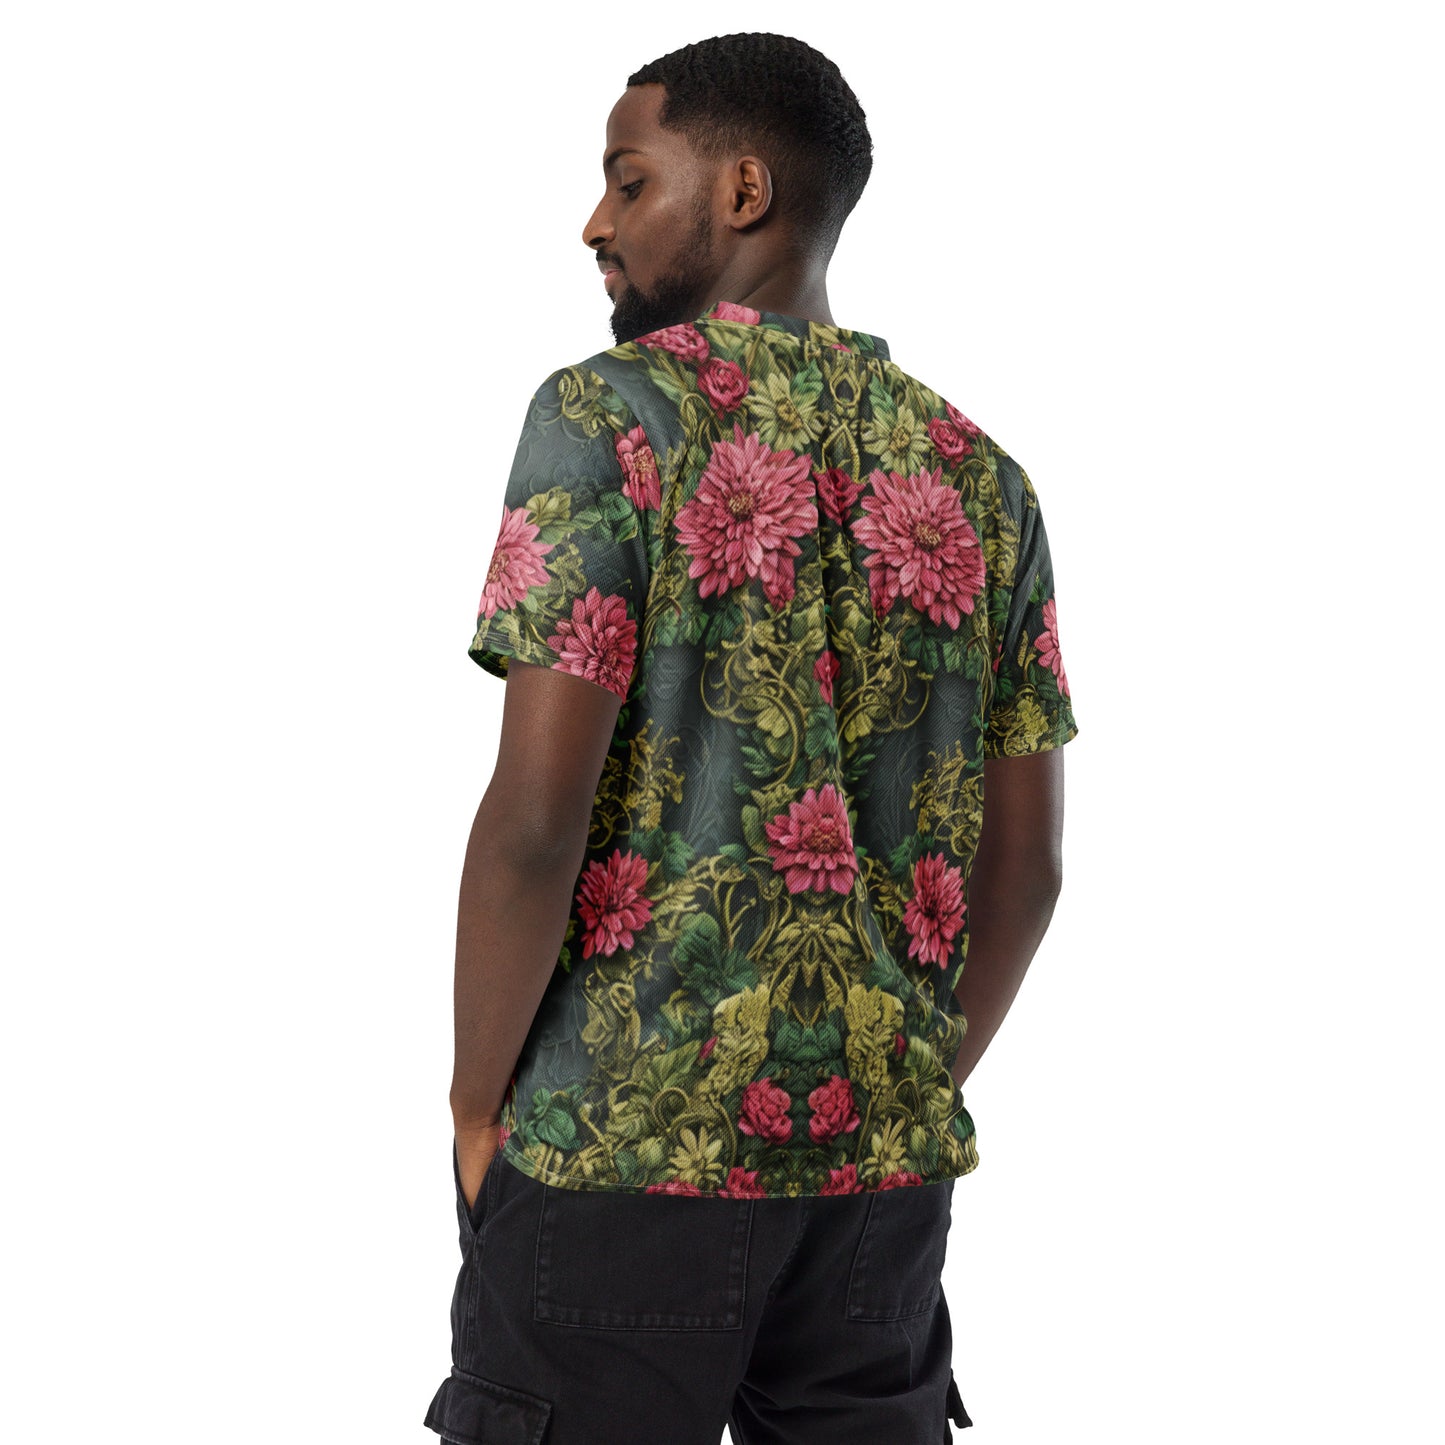 Vintage Floral Recycled unisex sports jersey